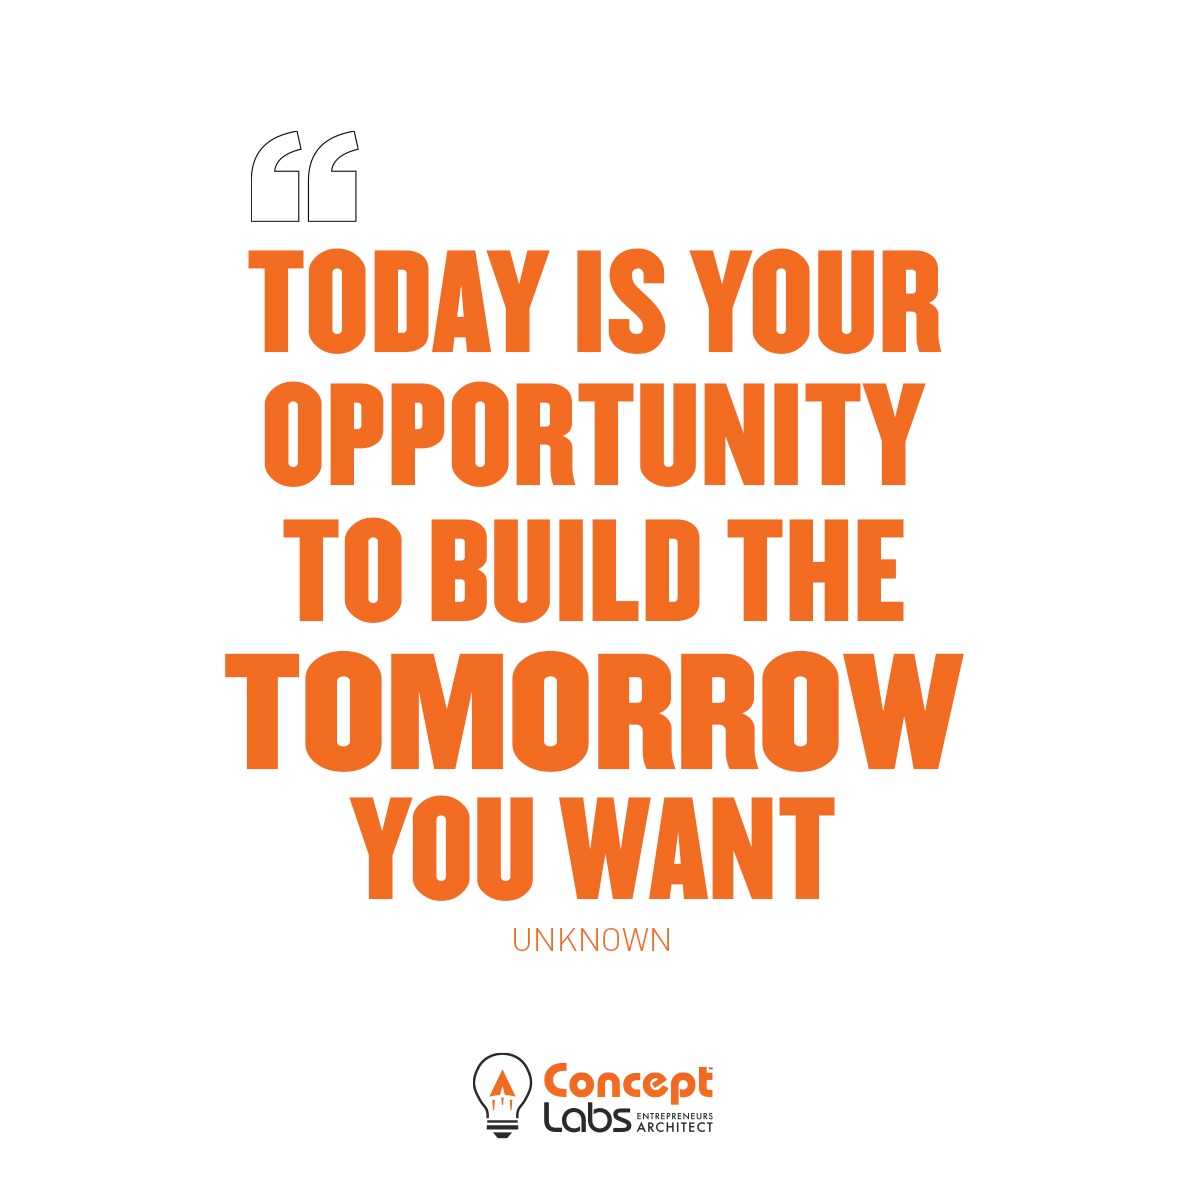 Today is the day to build the tomorrow you want!!

Start today The Concept Labs

#Entrepreneur  #startups  #businessowner  #Entrepreneurship  #Ownership  #starttoday #startnow #buildyourself #buildyourbusiness